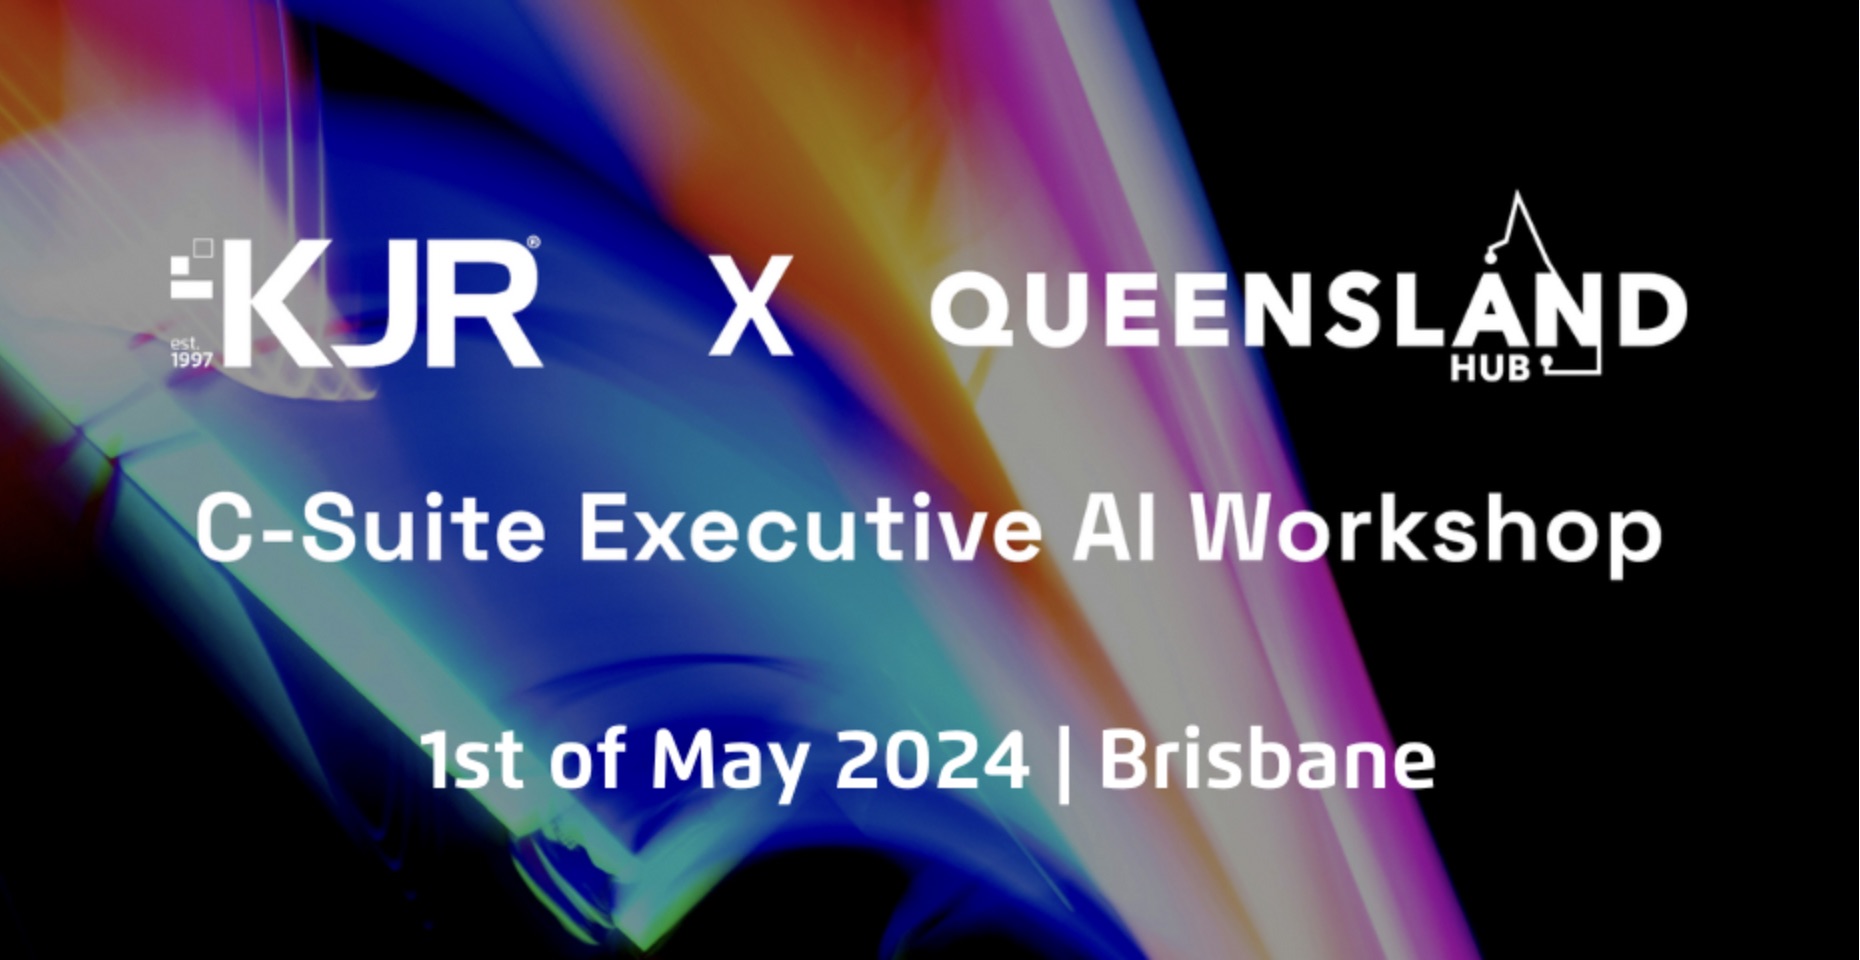 KJR C-Suite Executive AI Workshop: In-person 1st of May, Brisbane